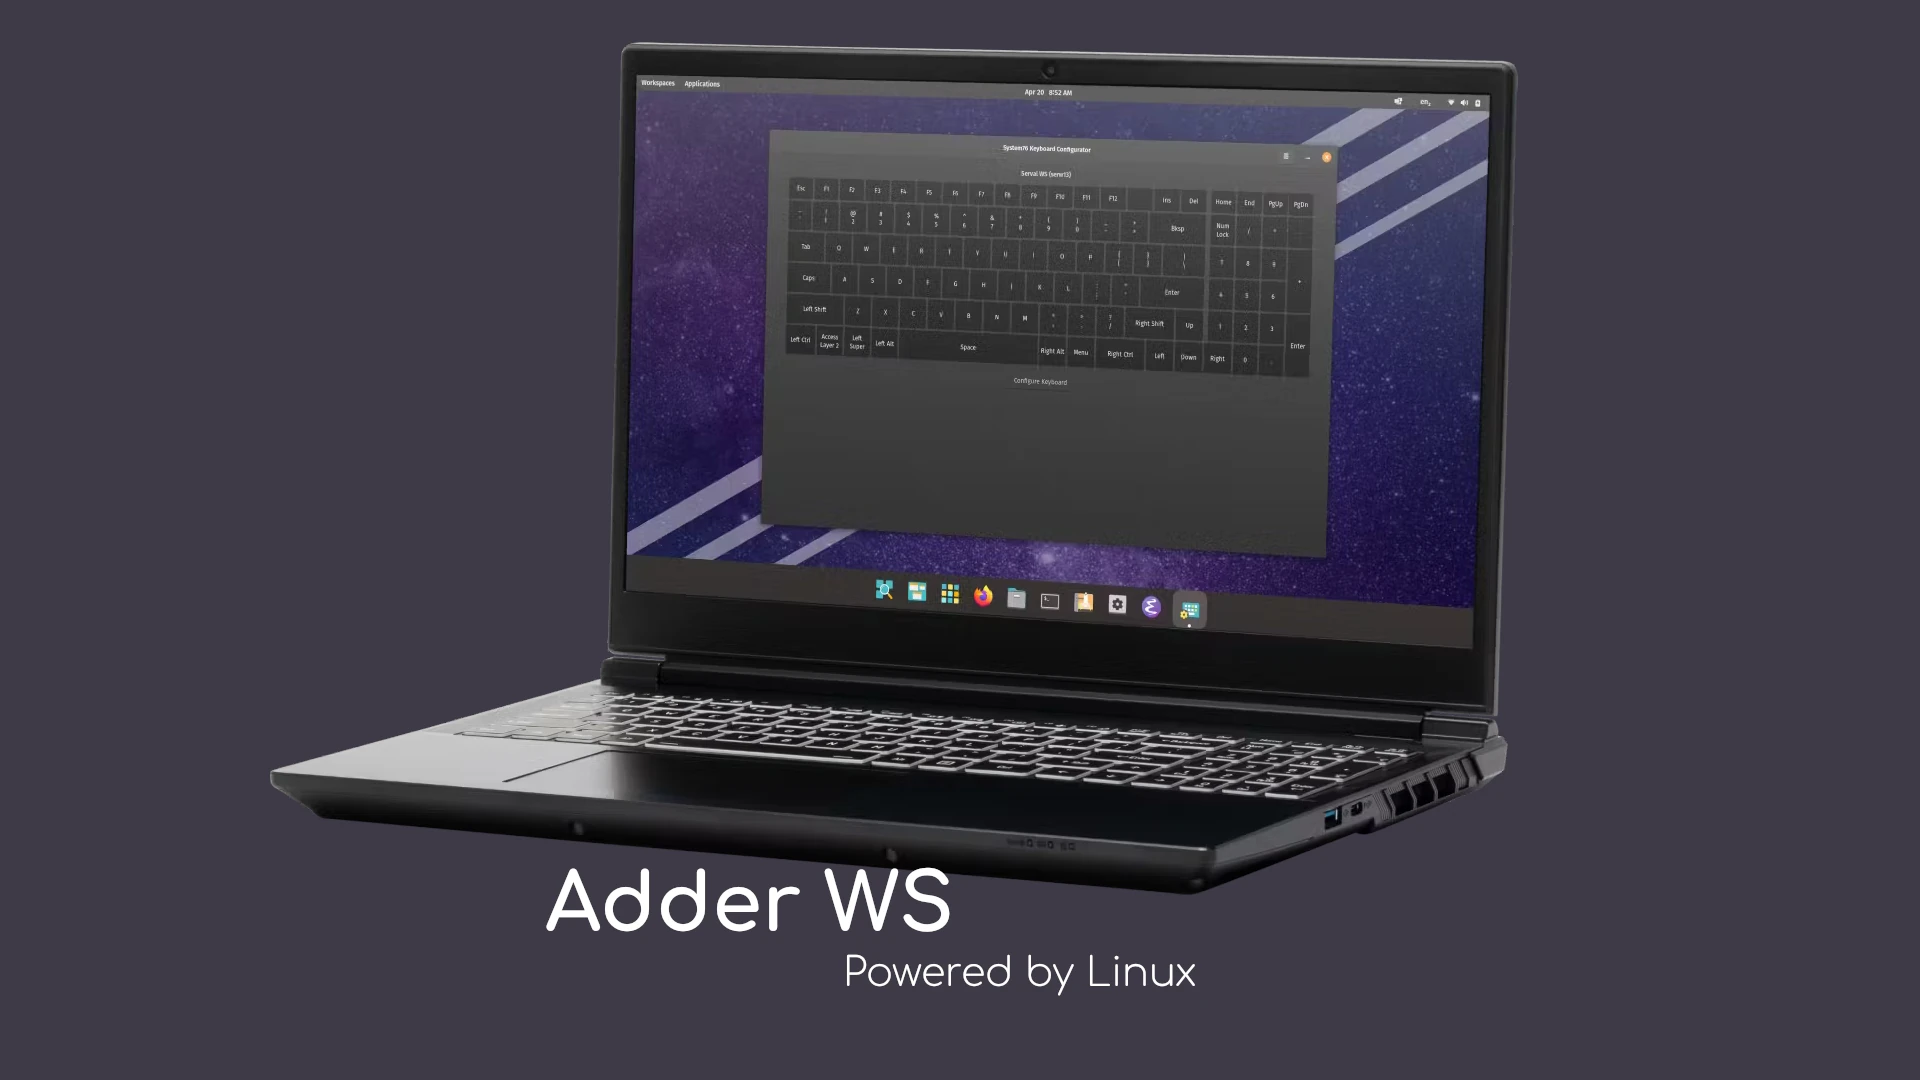 System76 Refreshes Its Adder WS Linux Laptop with an HX-Class 14th Gen Intel CPU